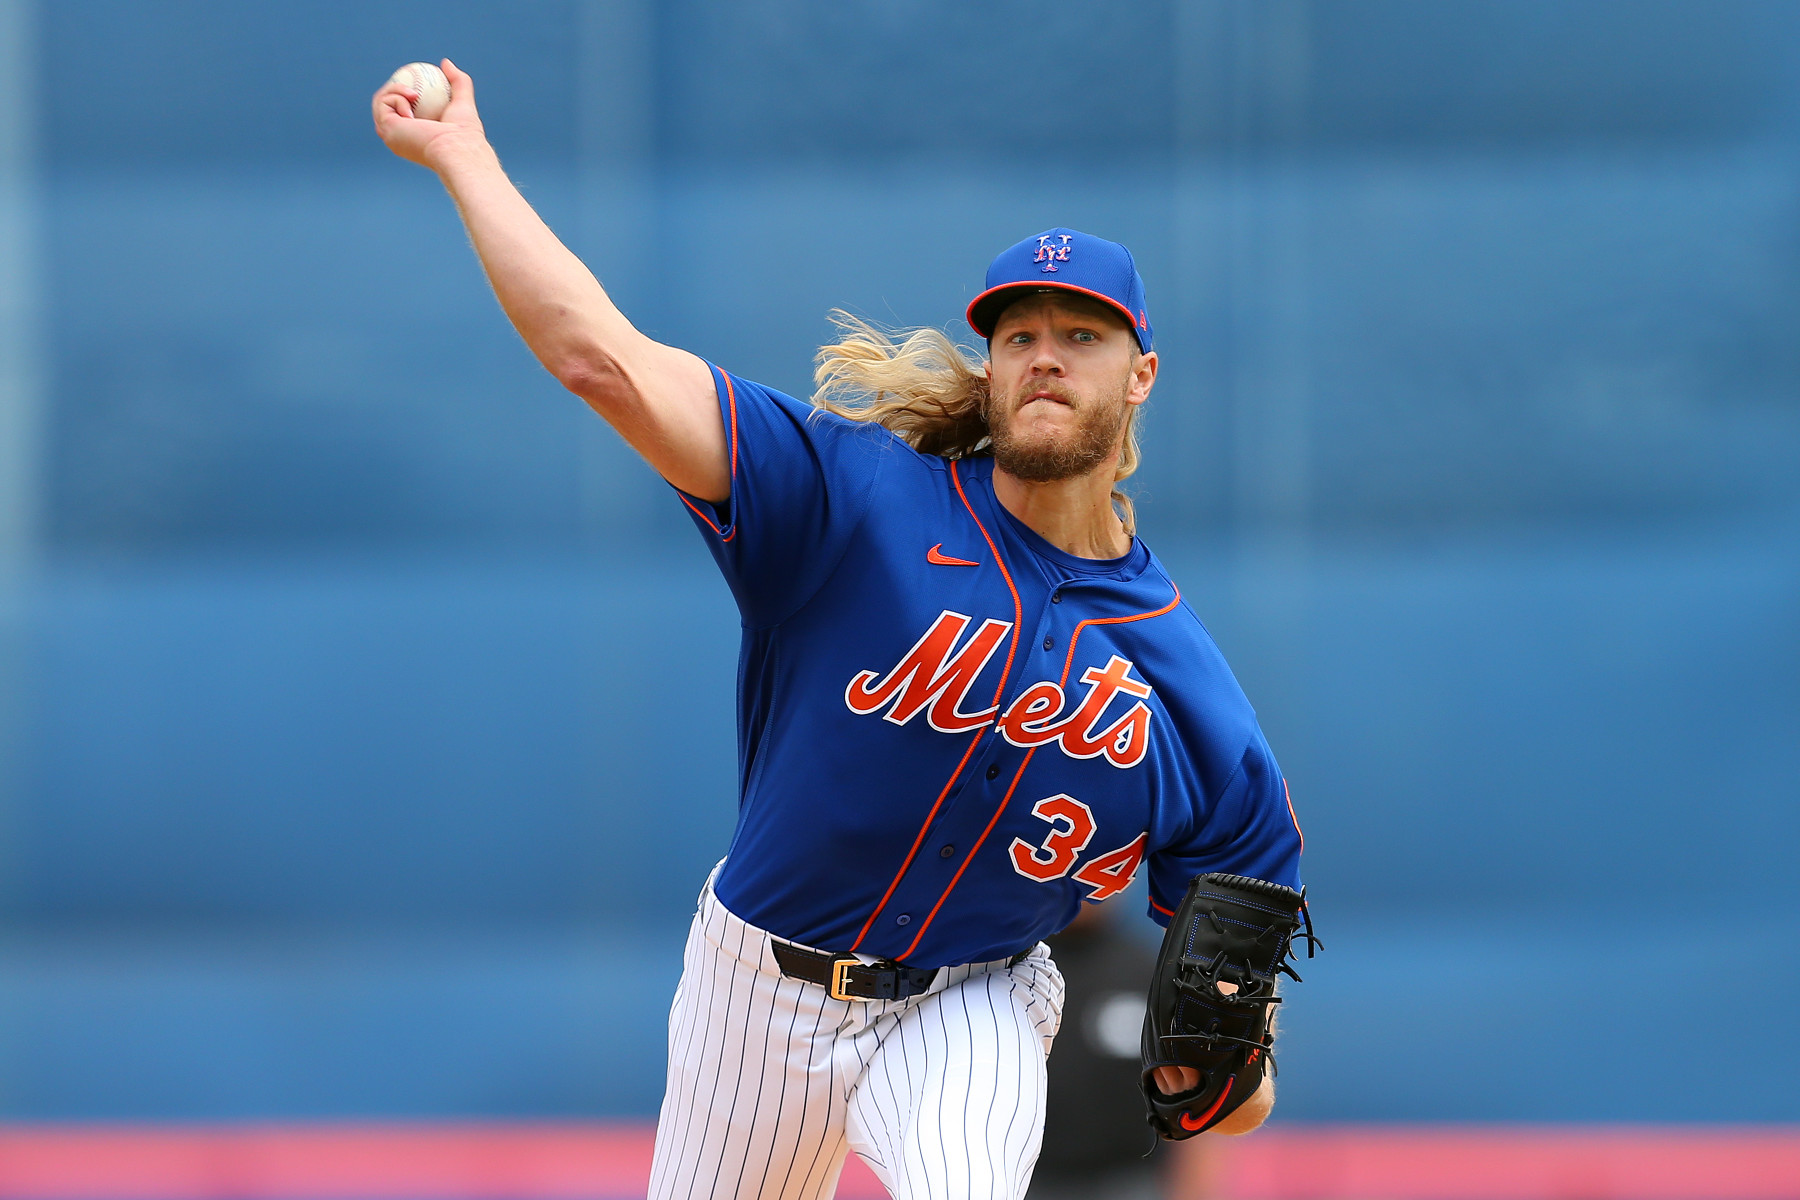 Noah Syndergaard finishes fourth in NL Rookie of the Year vote